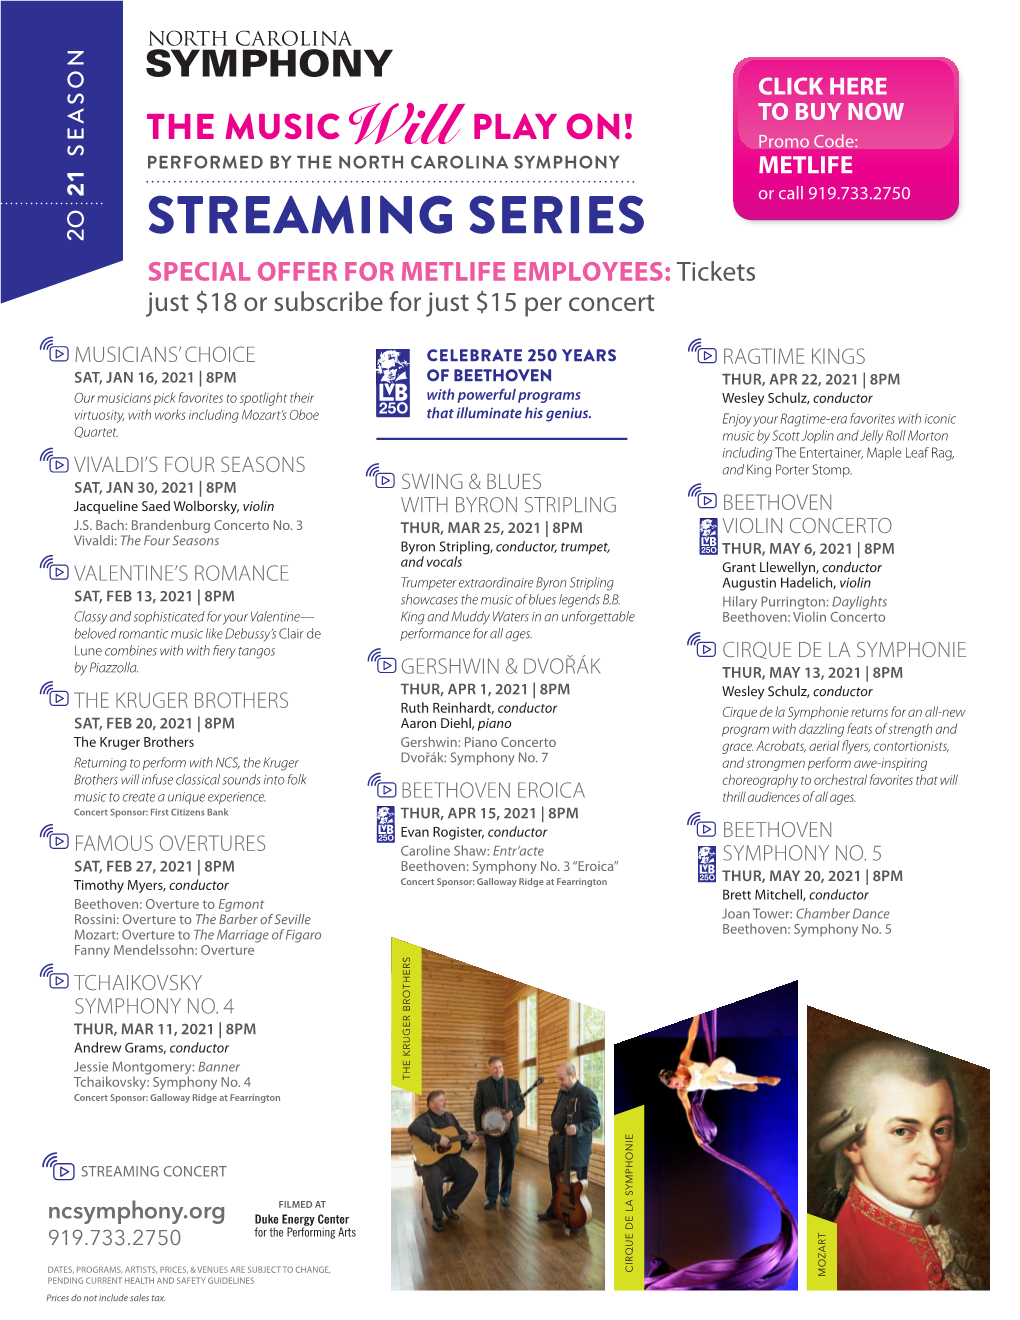 STREAMING SERIES SPECIAL OFFER for METLIFE EMPLOYEES: Tickets Just $18 Or Subscribe for Just $15 Per Concert